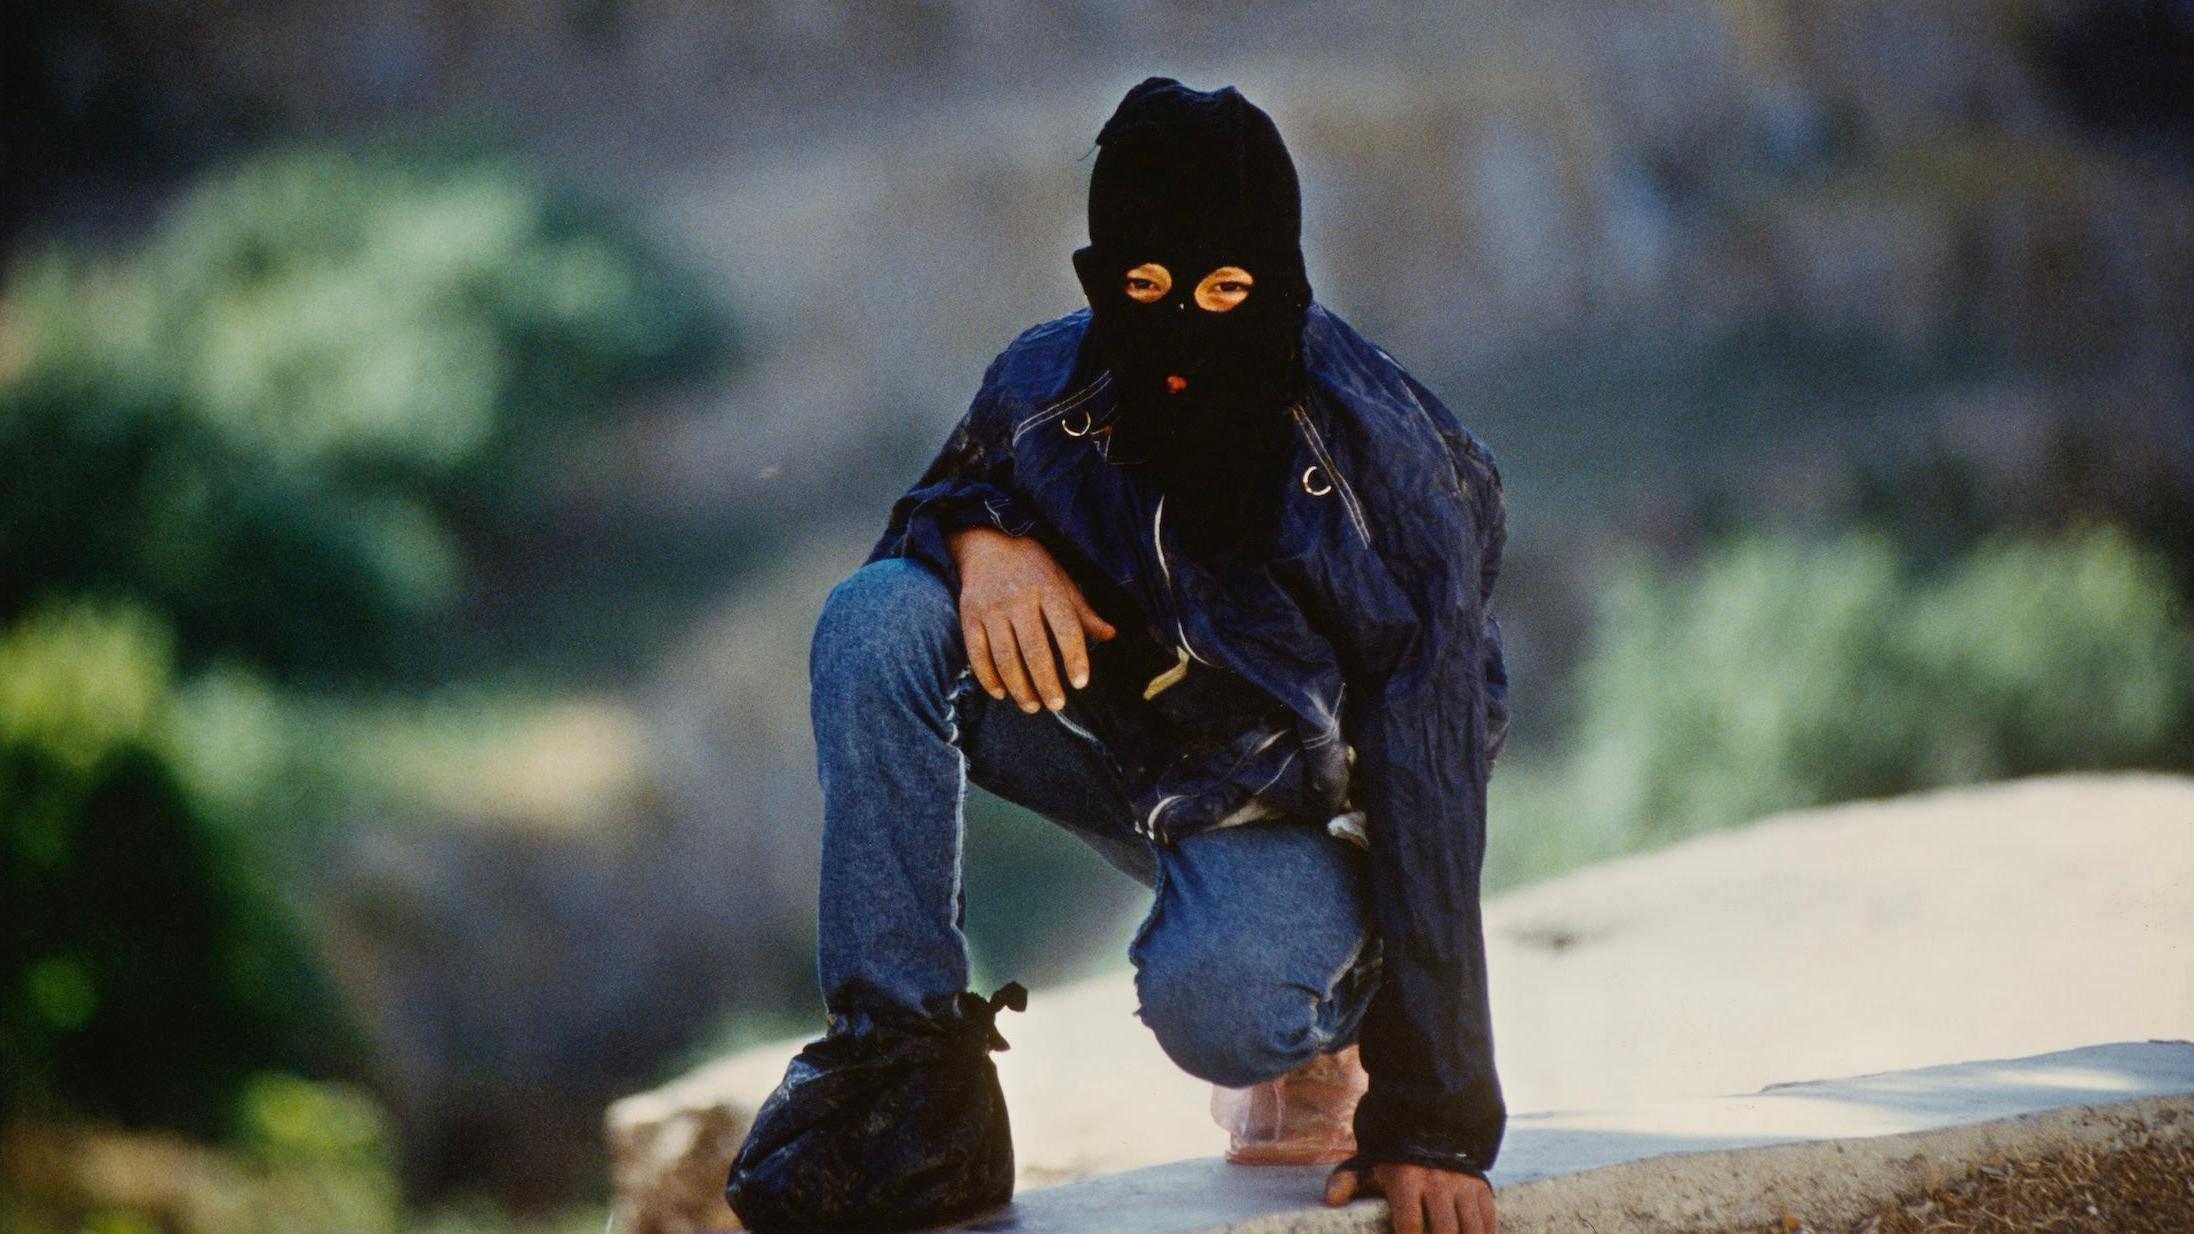 Palestinian combatants wearing a mask over his head with holes for mouth and eyes, crouching on a wall